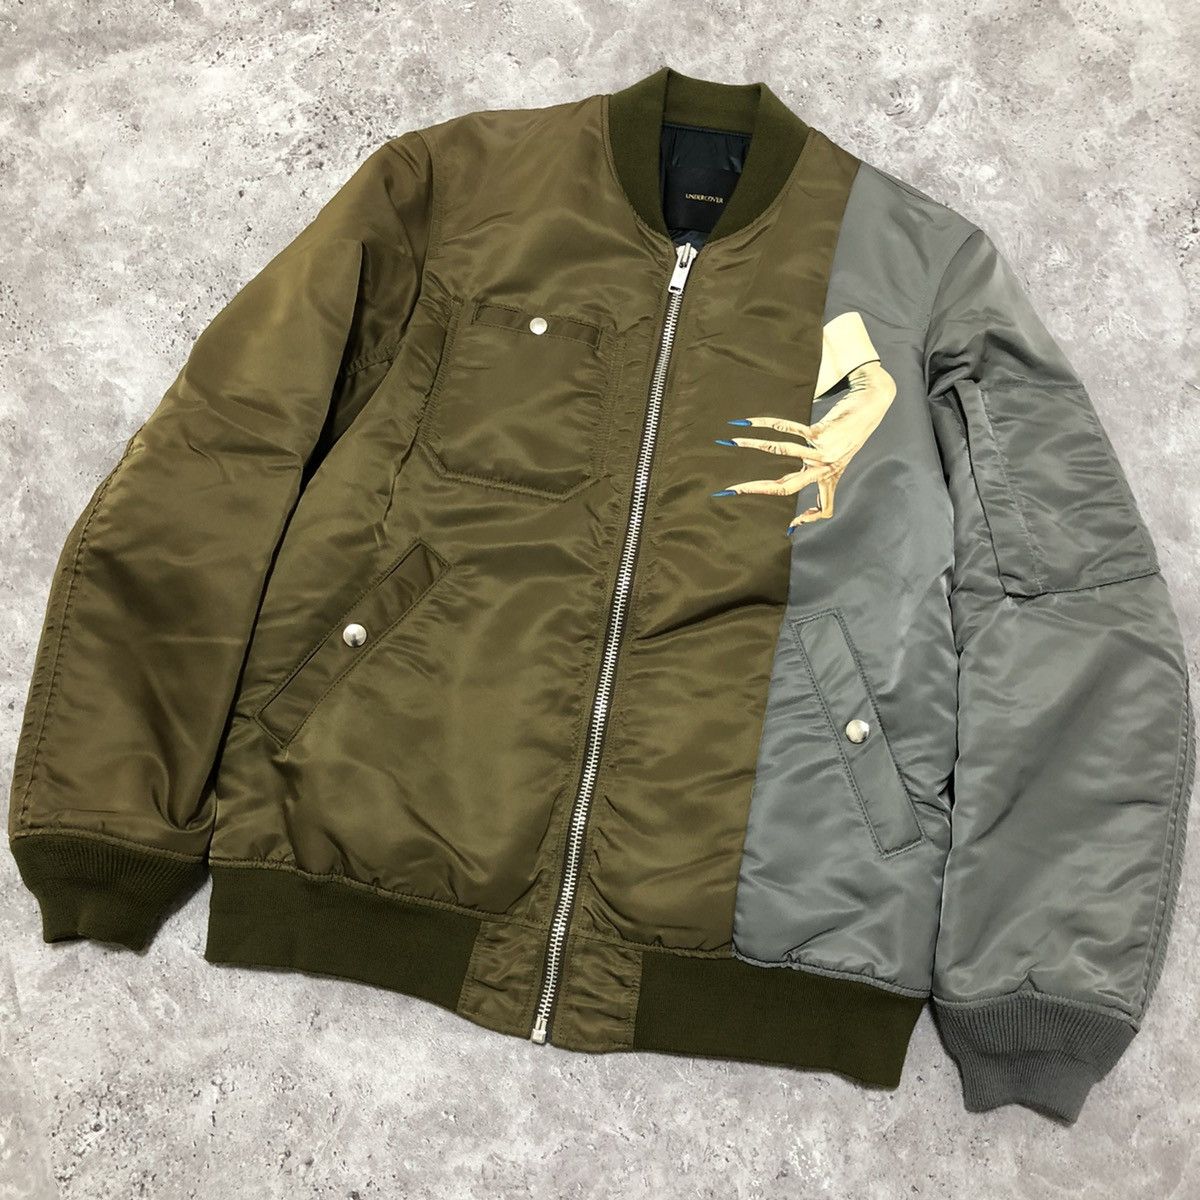 Undercover Undercover 15aw D-HAND ma-1 | Grailed